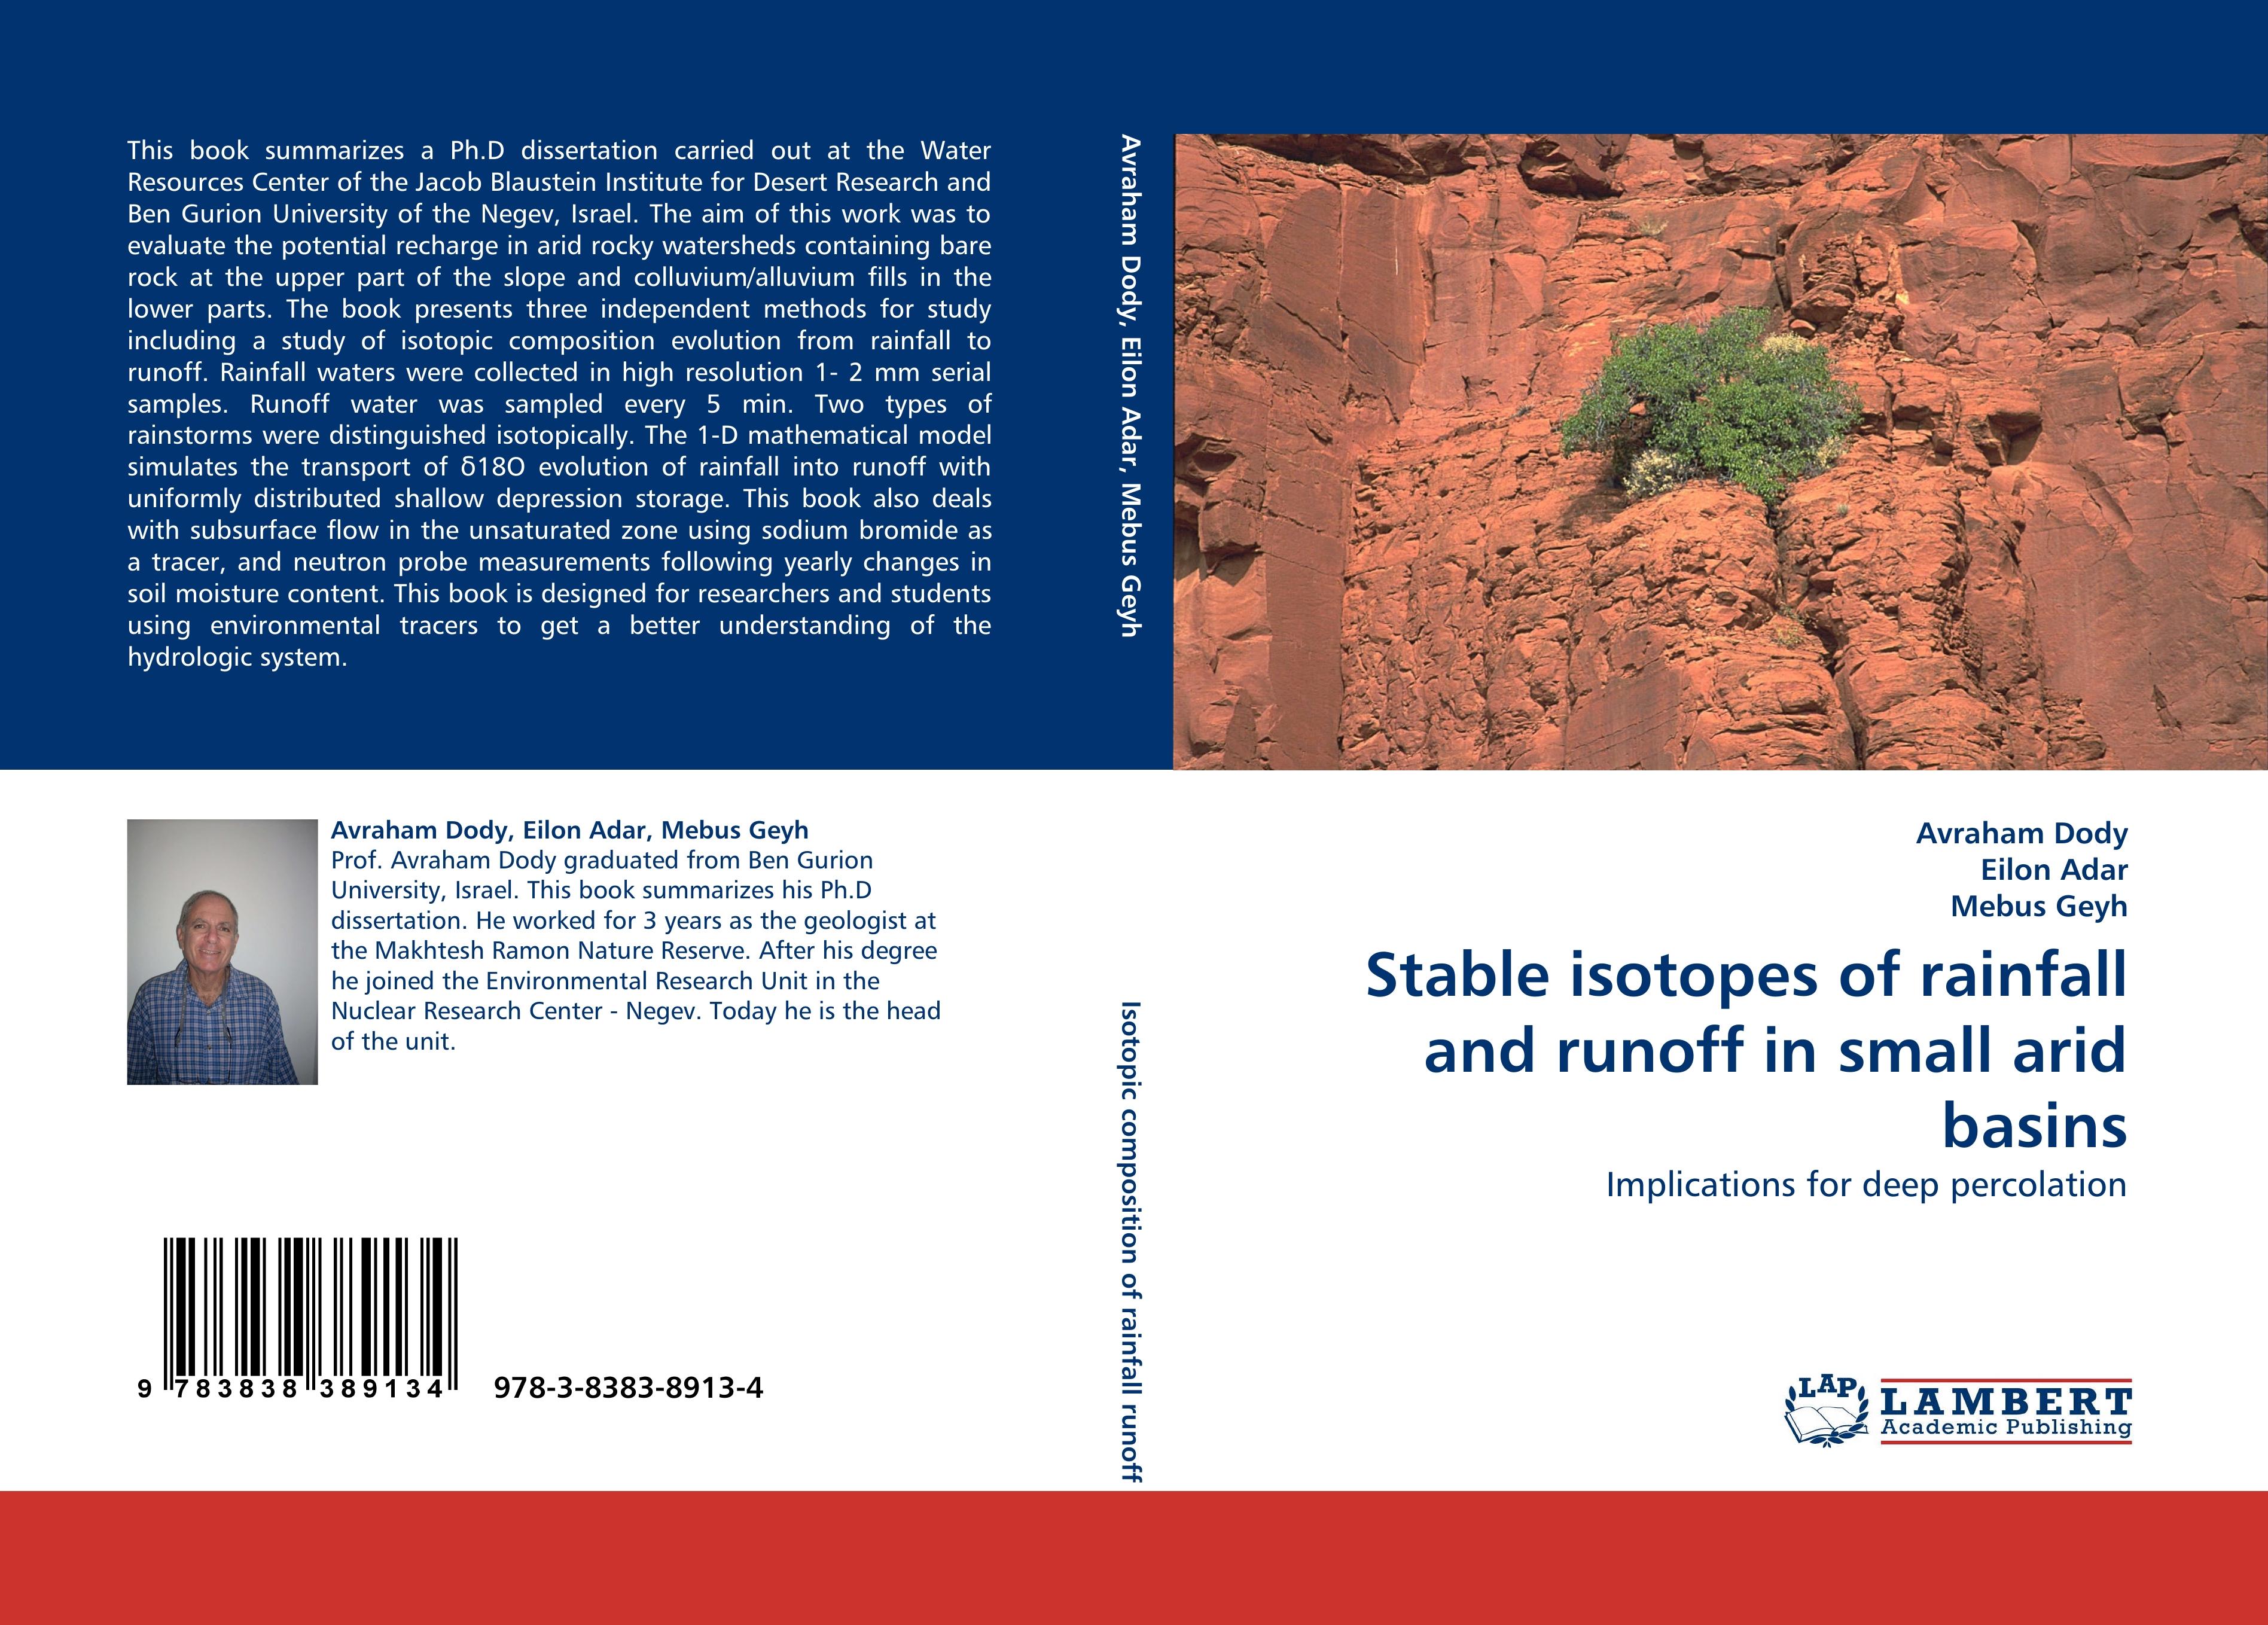 Stable isotopes of rainfall and runoff in small arid basins - Avraham Dody Eilon Adar Mebus Geyh